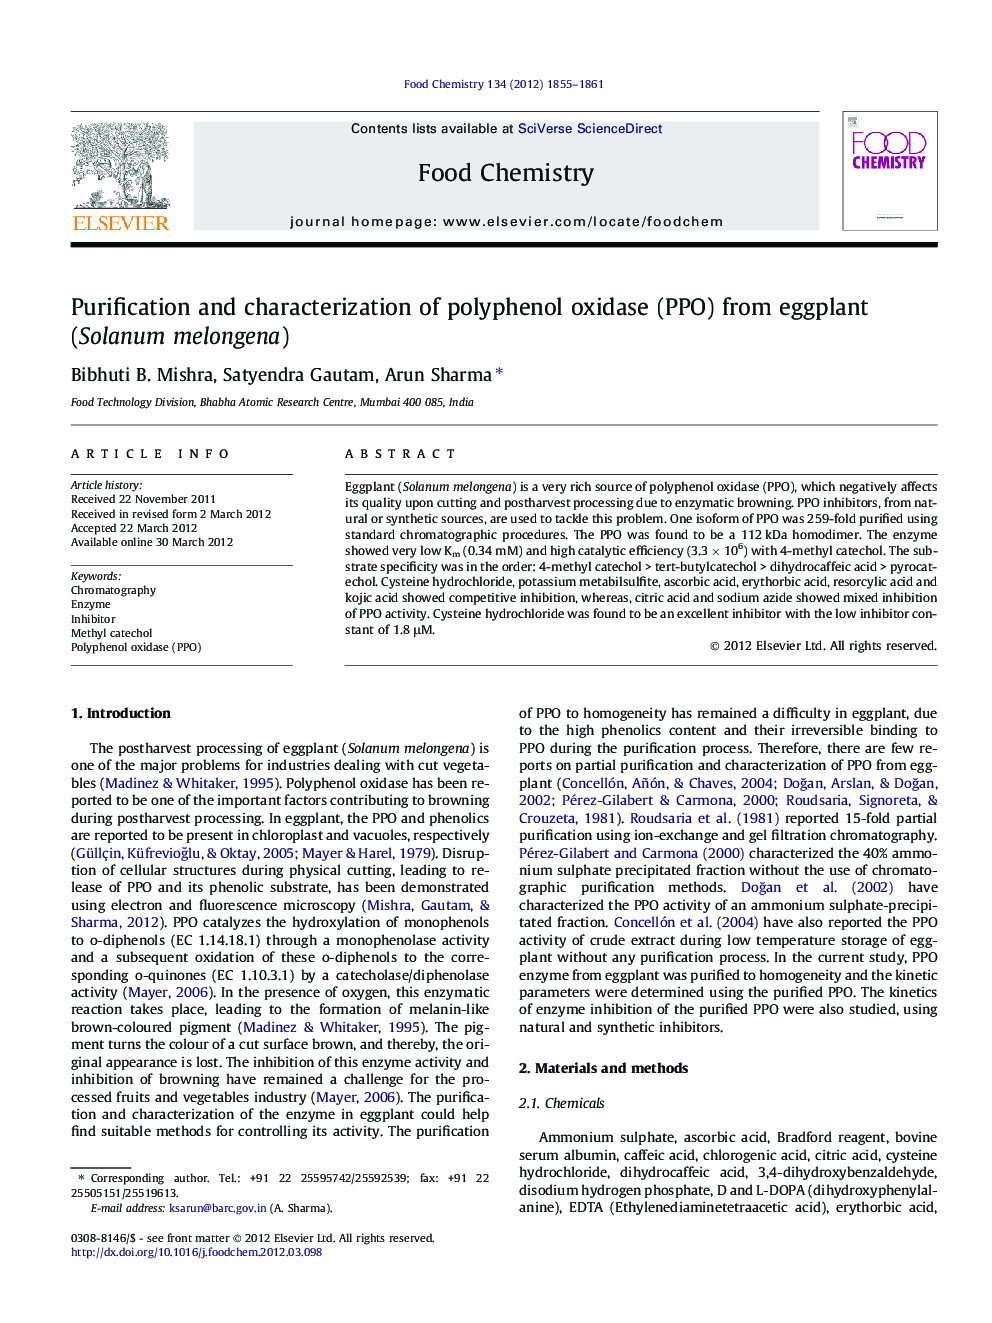 Purification and characterisation of polyphenol oxidase (PPO) from eggplant (Solanum melongena)